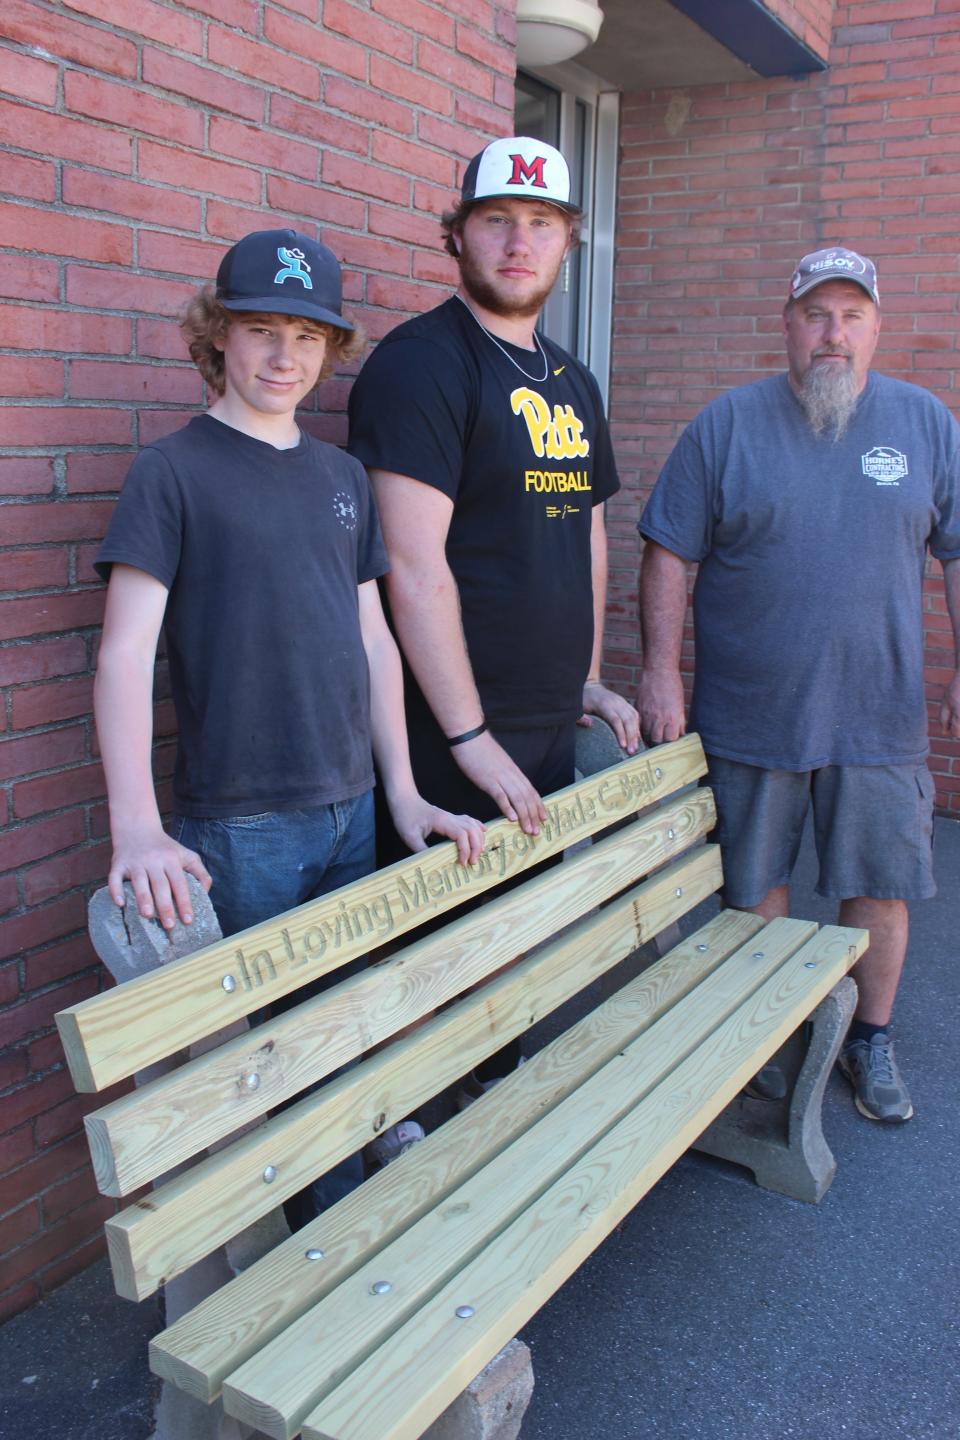 Caden Snyder and Landon Ludy, both students in Doug Horne's technology education classes at Meyersdale Area High School, restored a discarded wooden bench (pictured here) using new technology. Horne is pictured to the right. The bench is in memory of the late Wade Beal of Meyersdale.